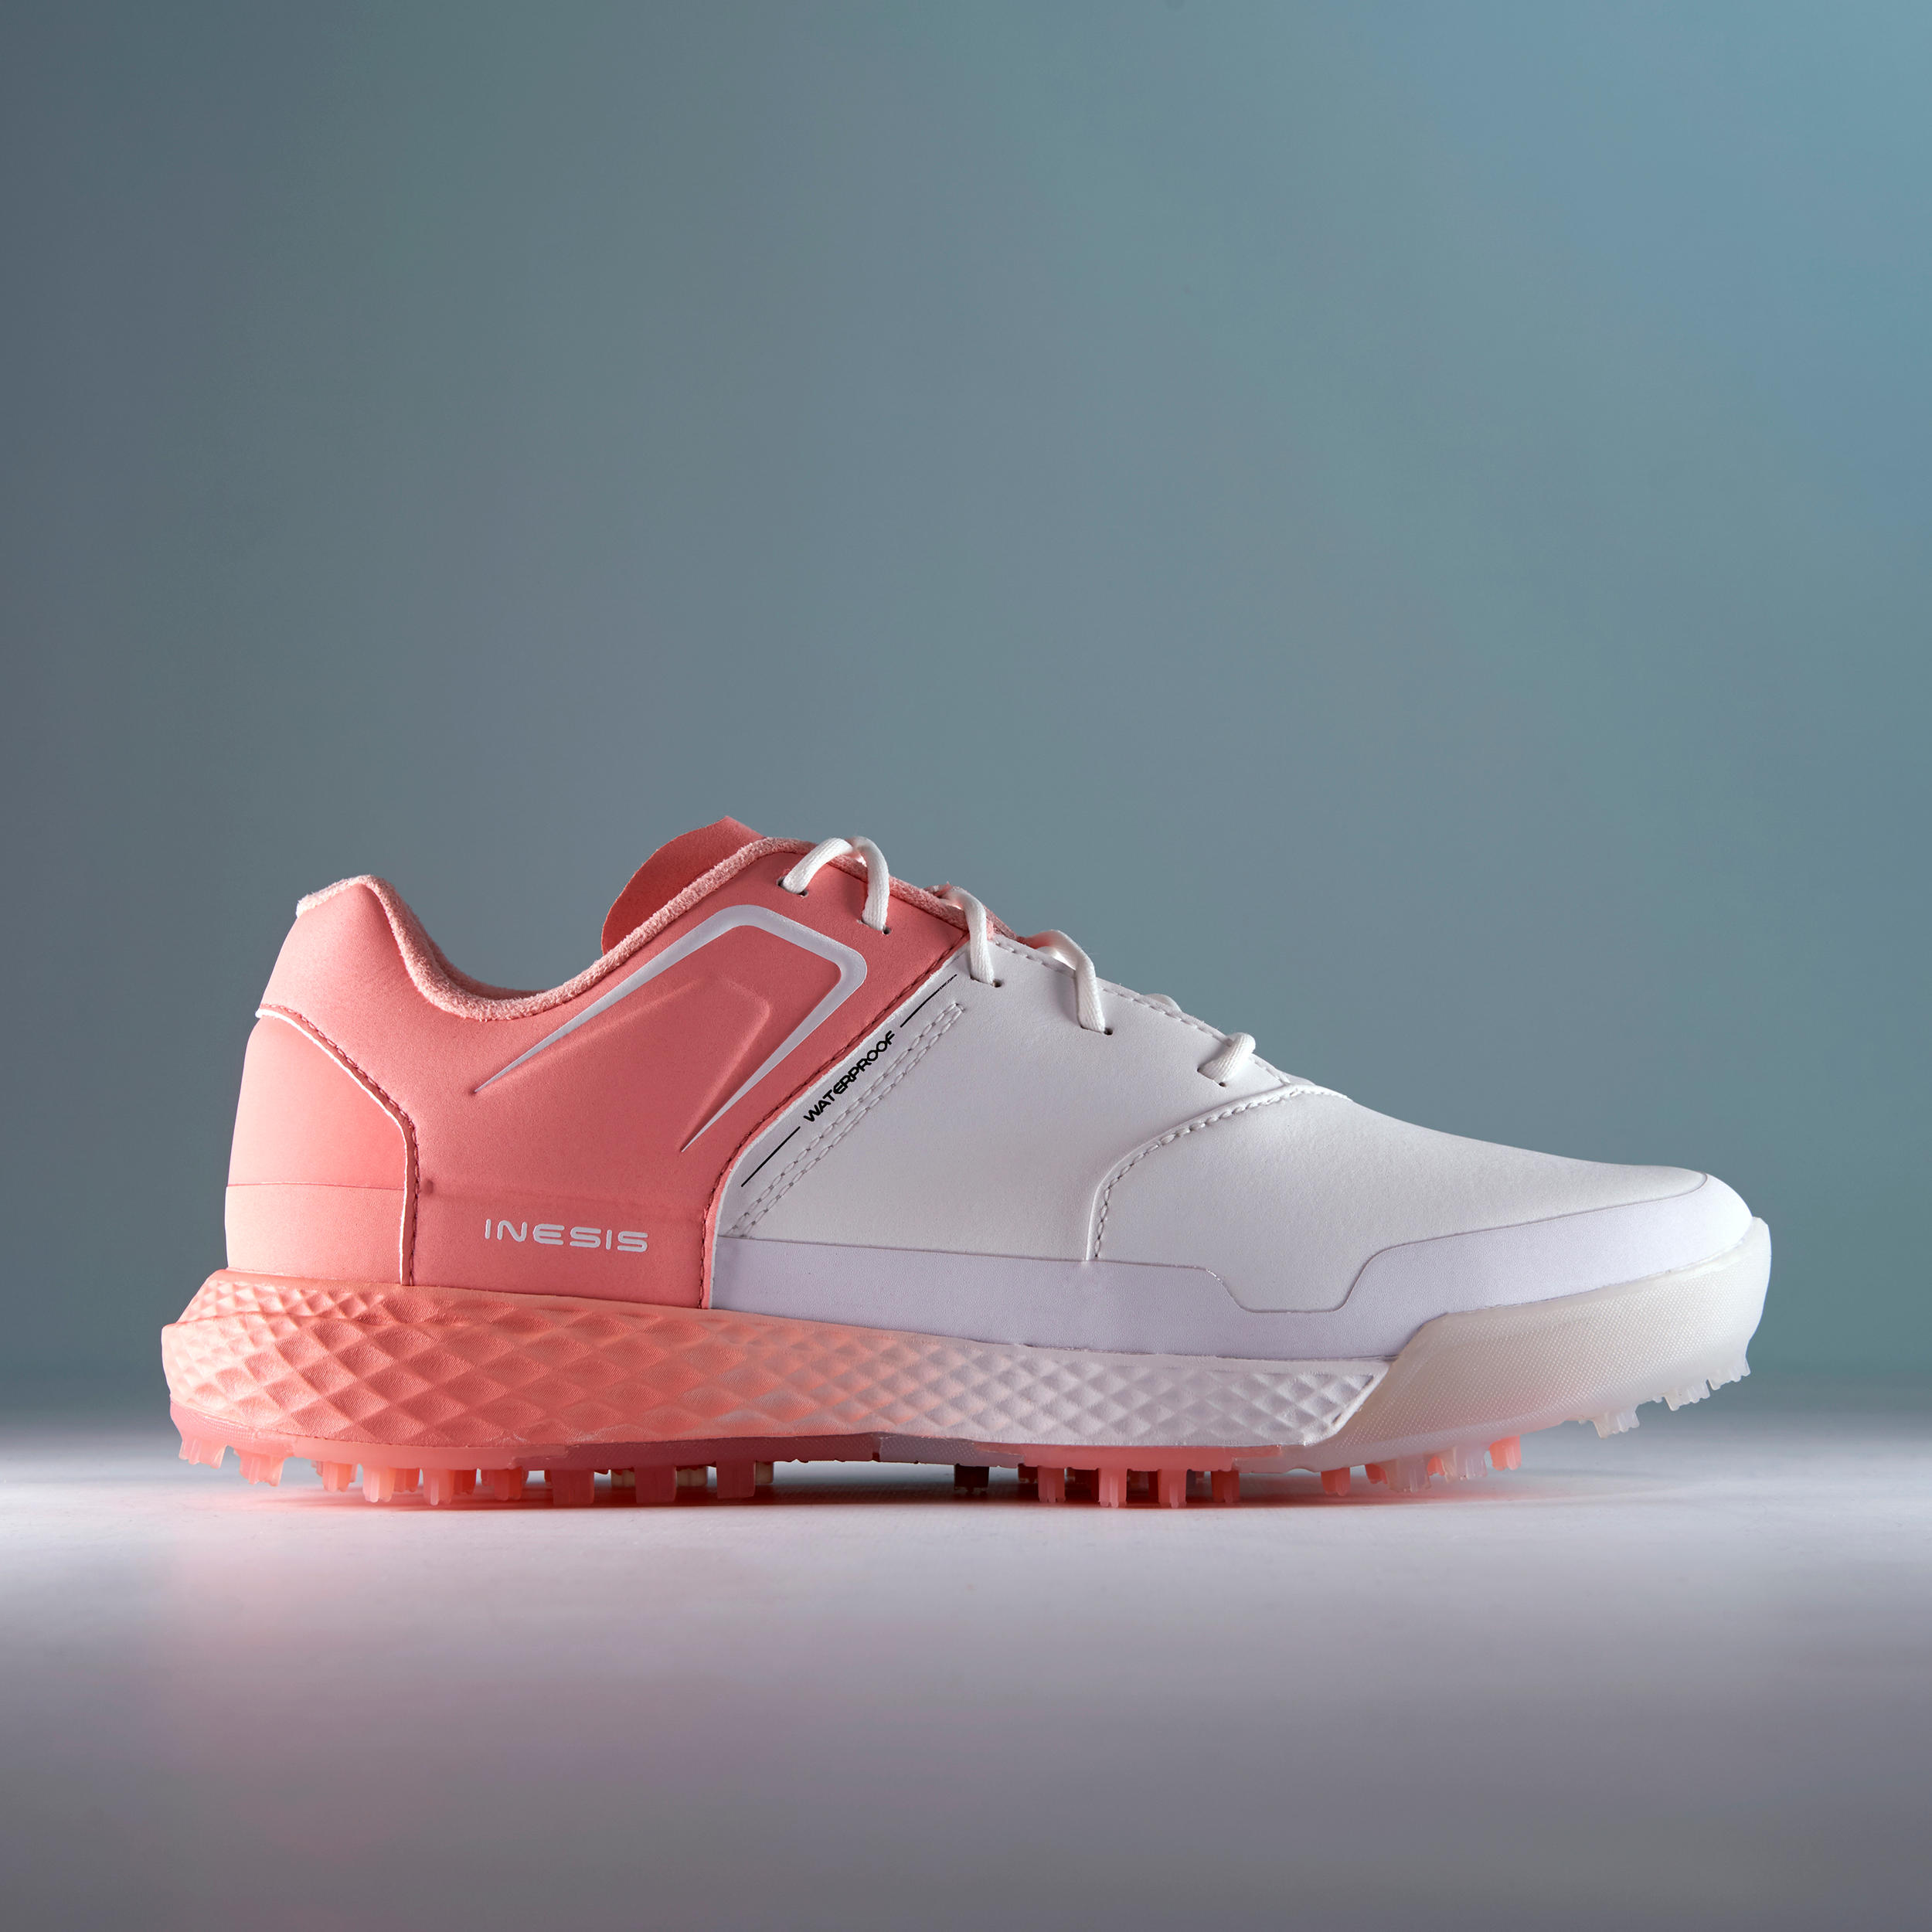 LADIES GRIP WATERPROOF GOLF SHOES WHITE AND PINK 5/13